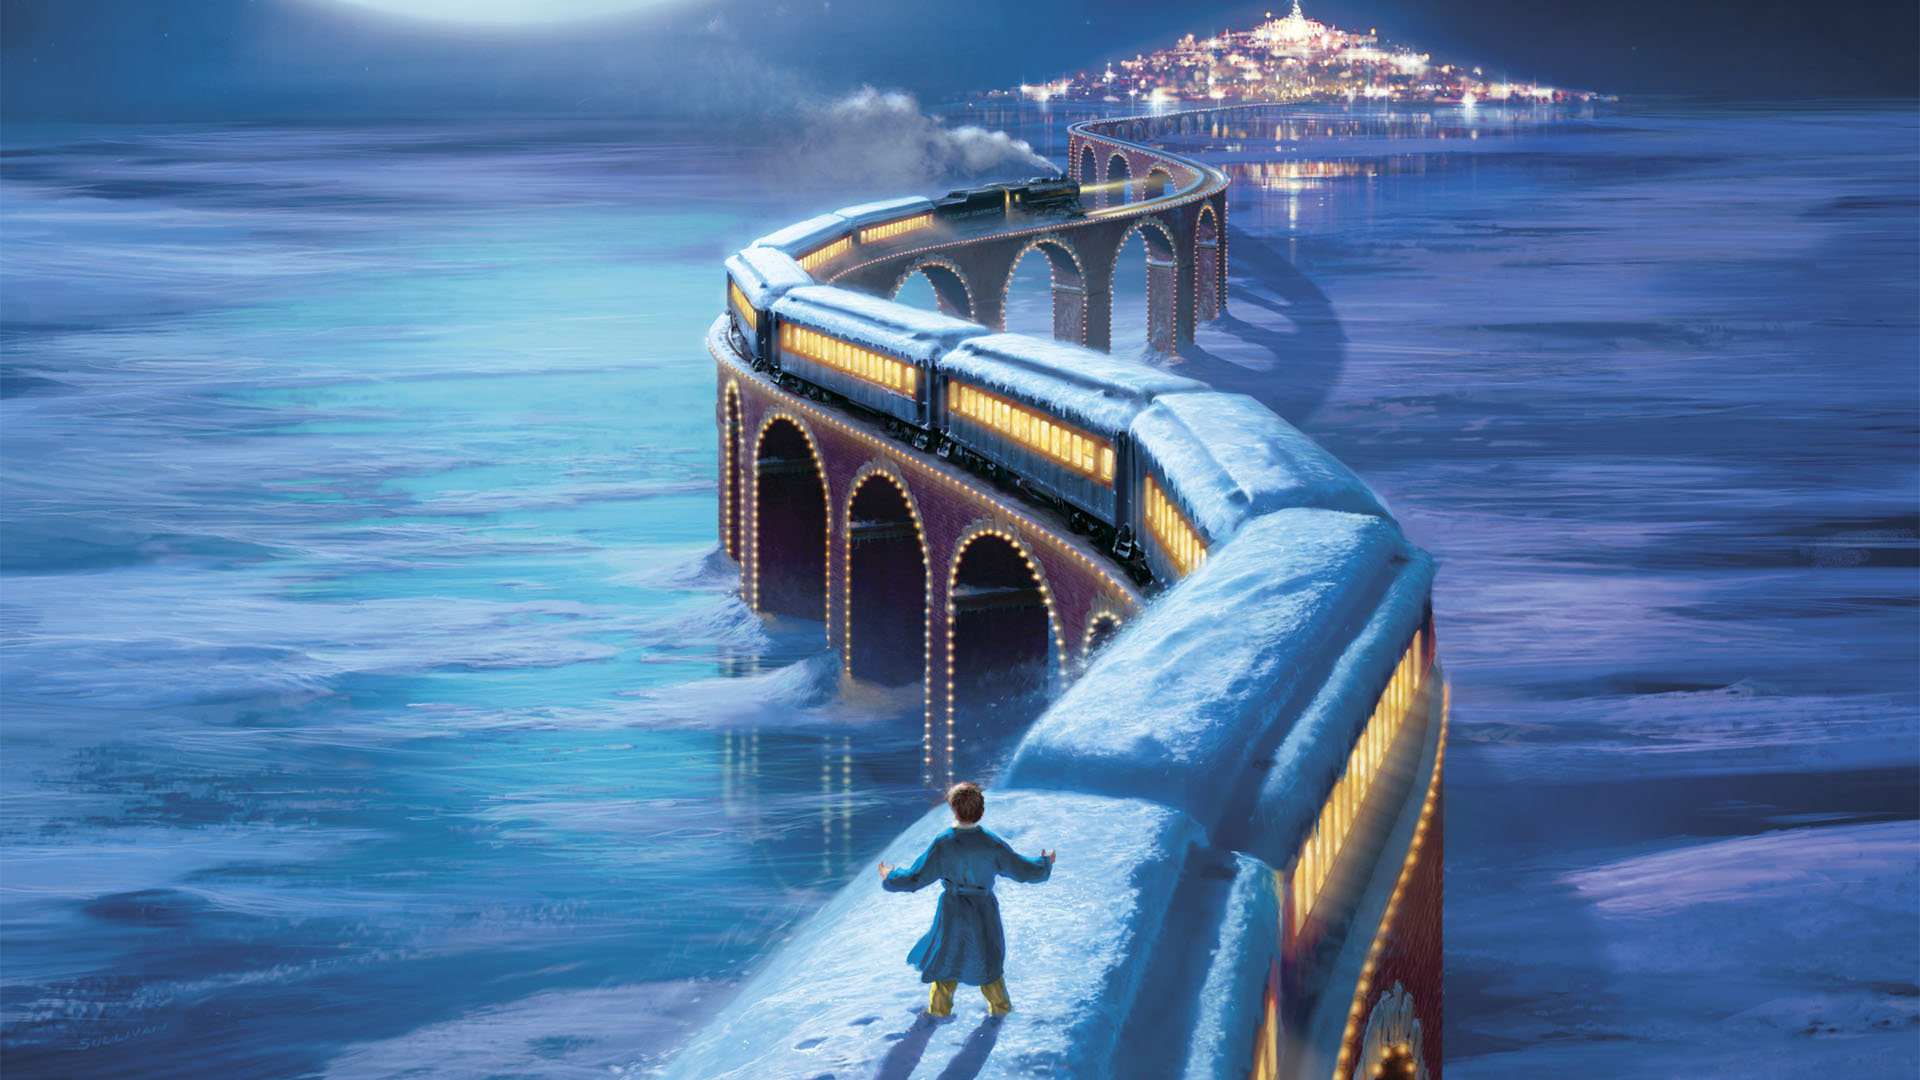 Images of The Polar Express | 1920x1080